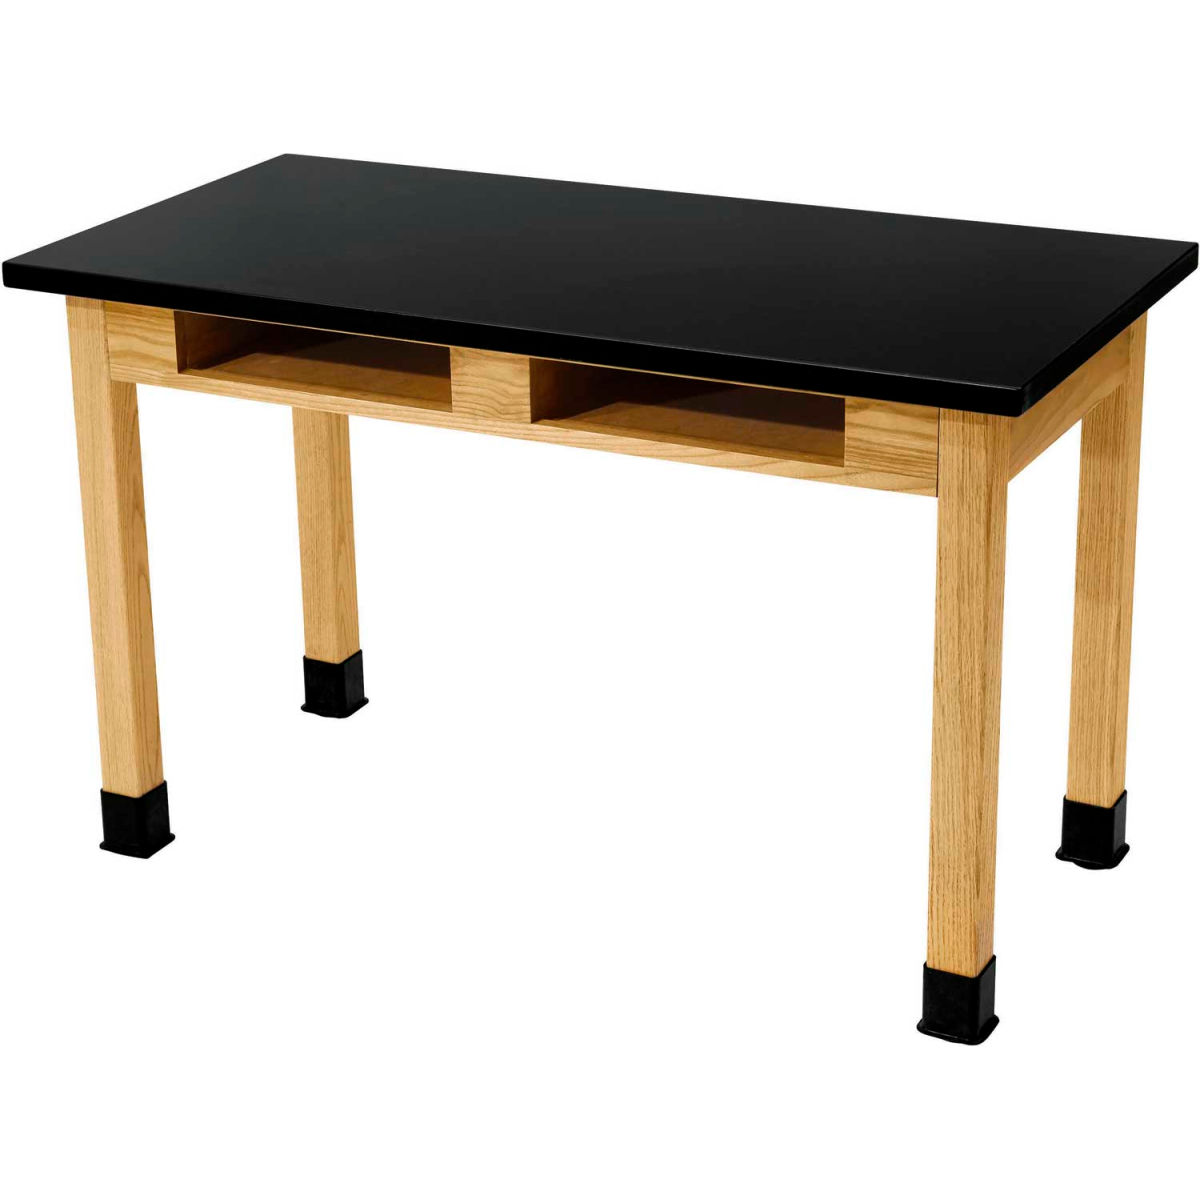 B1109969 Science Lab Table with Compartment & Chemical Resistant Top - Black with Oak Leg - 60 x 30 x 30 in -  National Public Seating